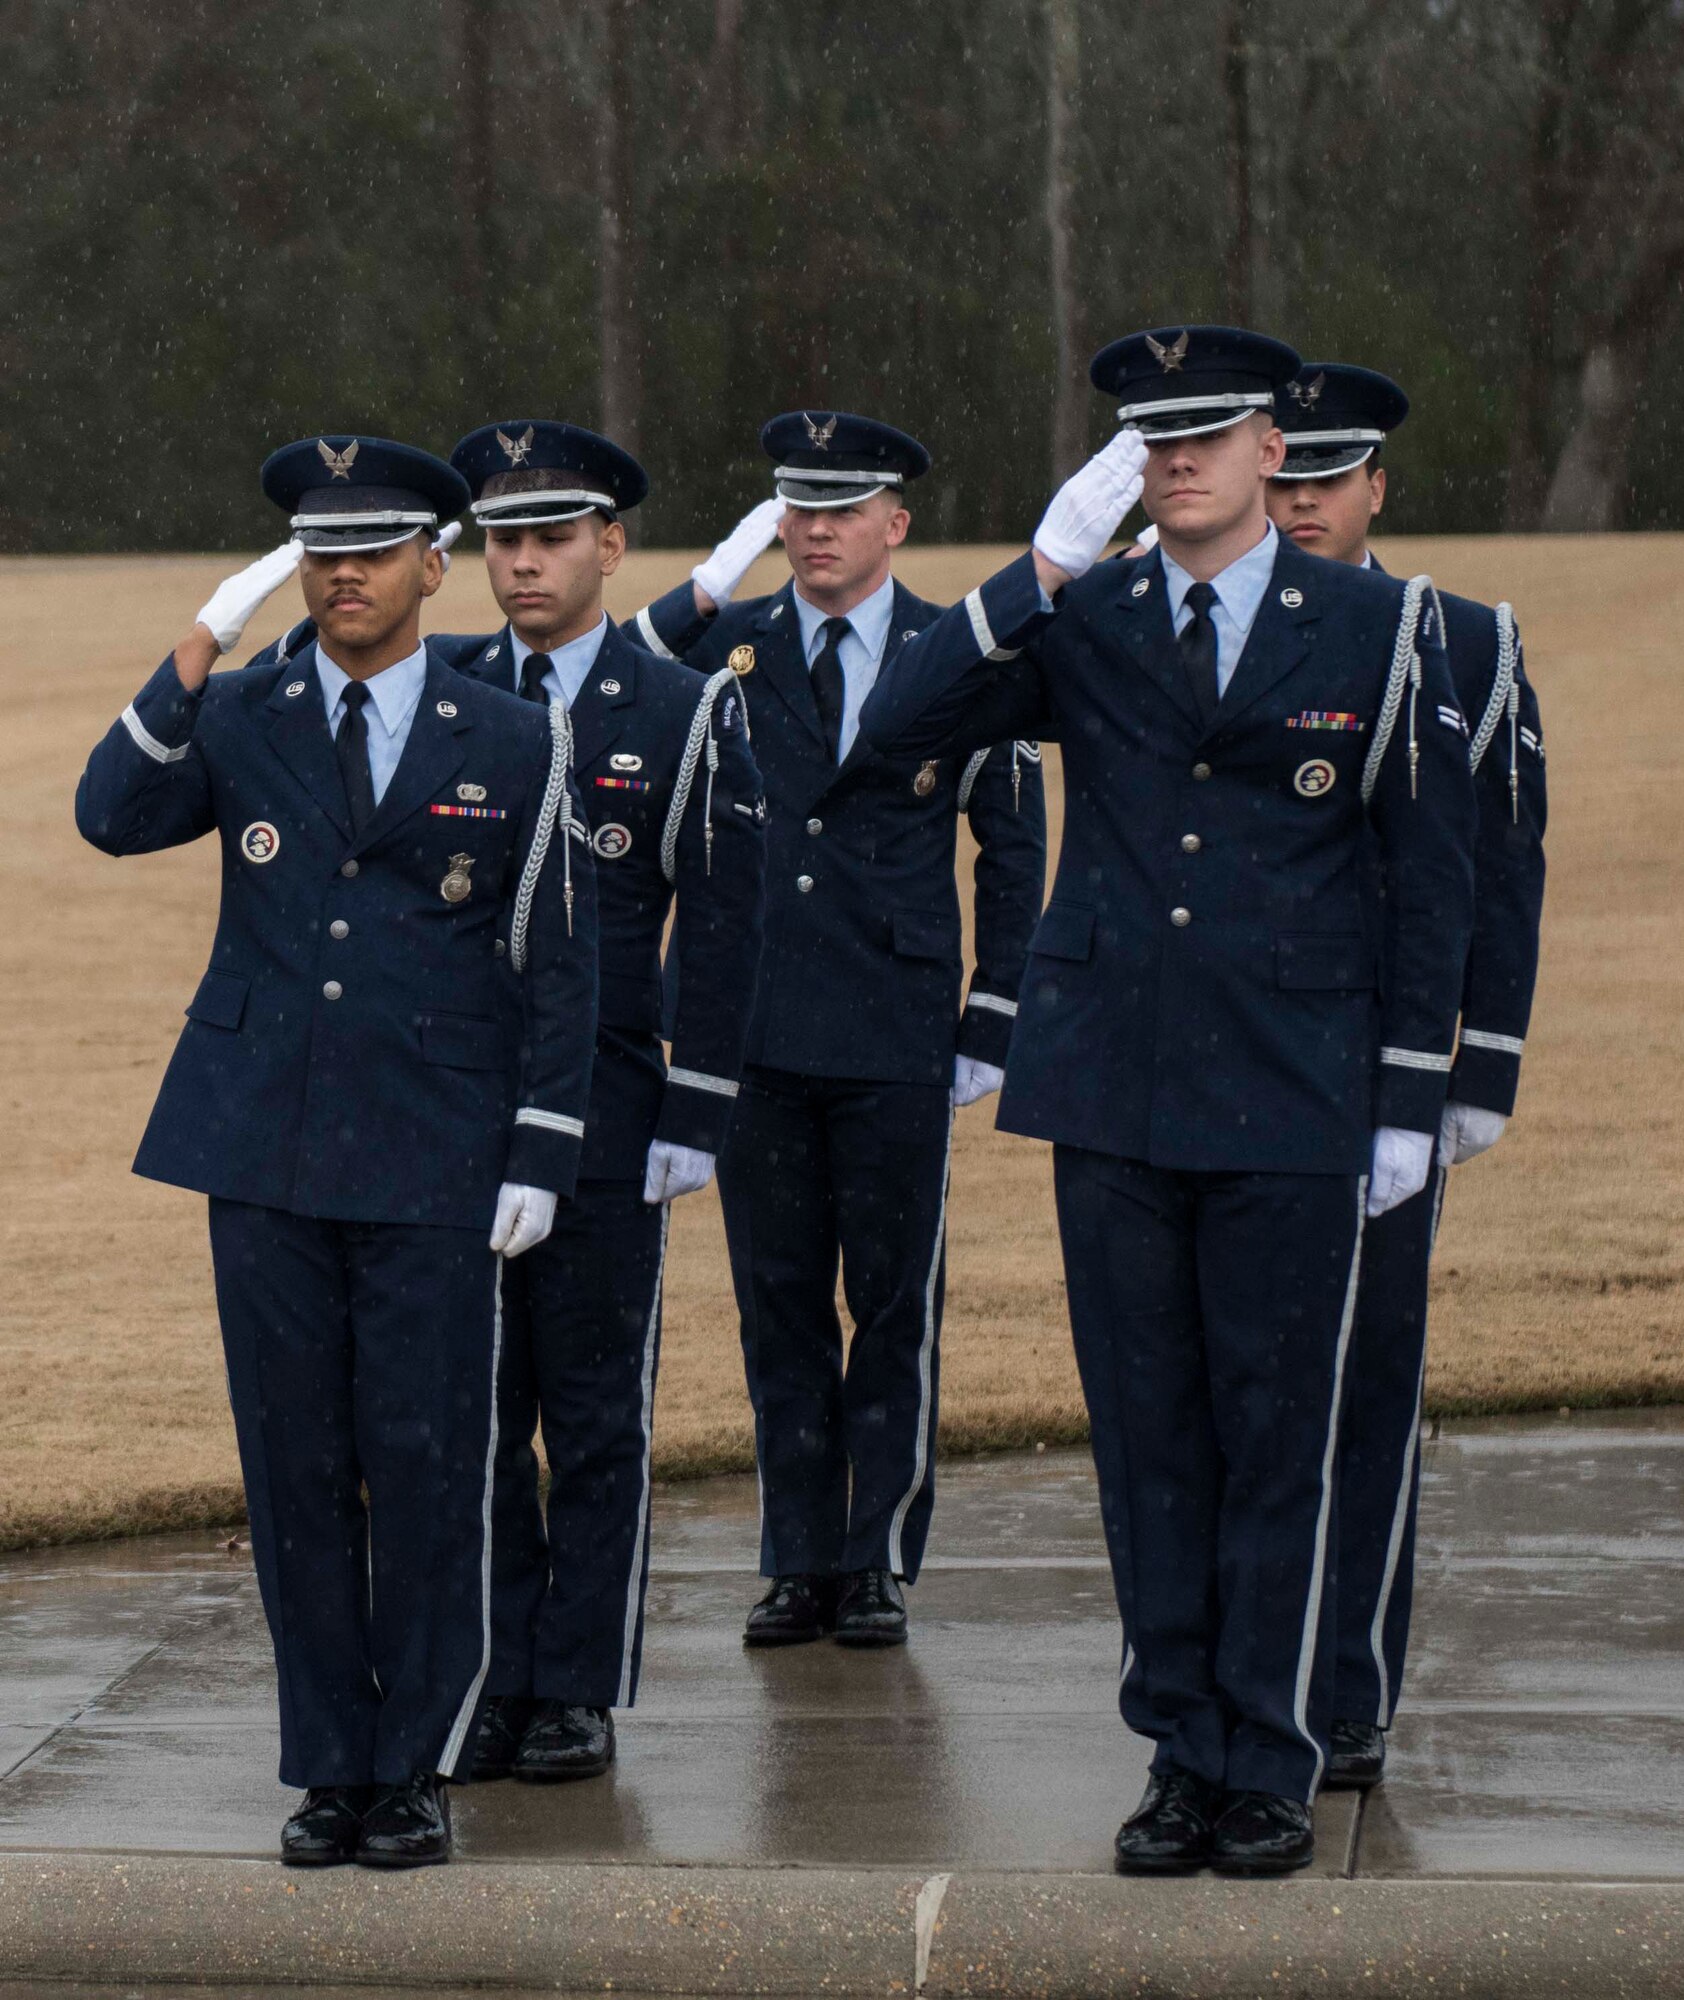 Columbus Air Force Base Honor Guardsmen salute as a hearse carrying the body of Staff Sgt. Tharin McNichols passes at the Mississippi Veterans Memorial Cemetery on Jan. 13, 2020, in Newton County, Miss. McNichols was a member of the 855th Aircraft Maintenance Squadron at Nellis Air Force Base, Nev. The honor guard’s primary mission is to provide military honors to fallen service members, but they also perform at official Air Force ceremonies and parades. (U.S. Air Force photo by Airman Davis Donaldson)